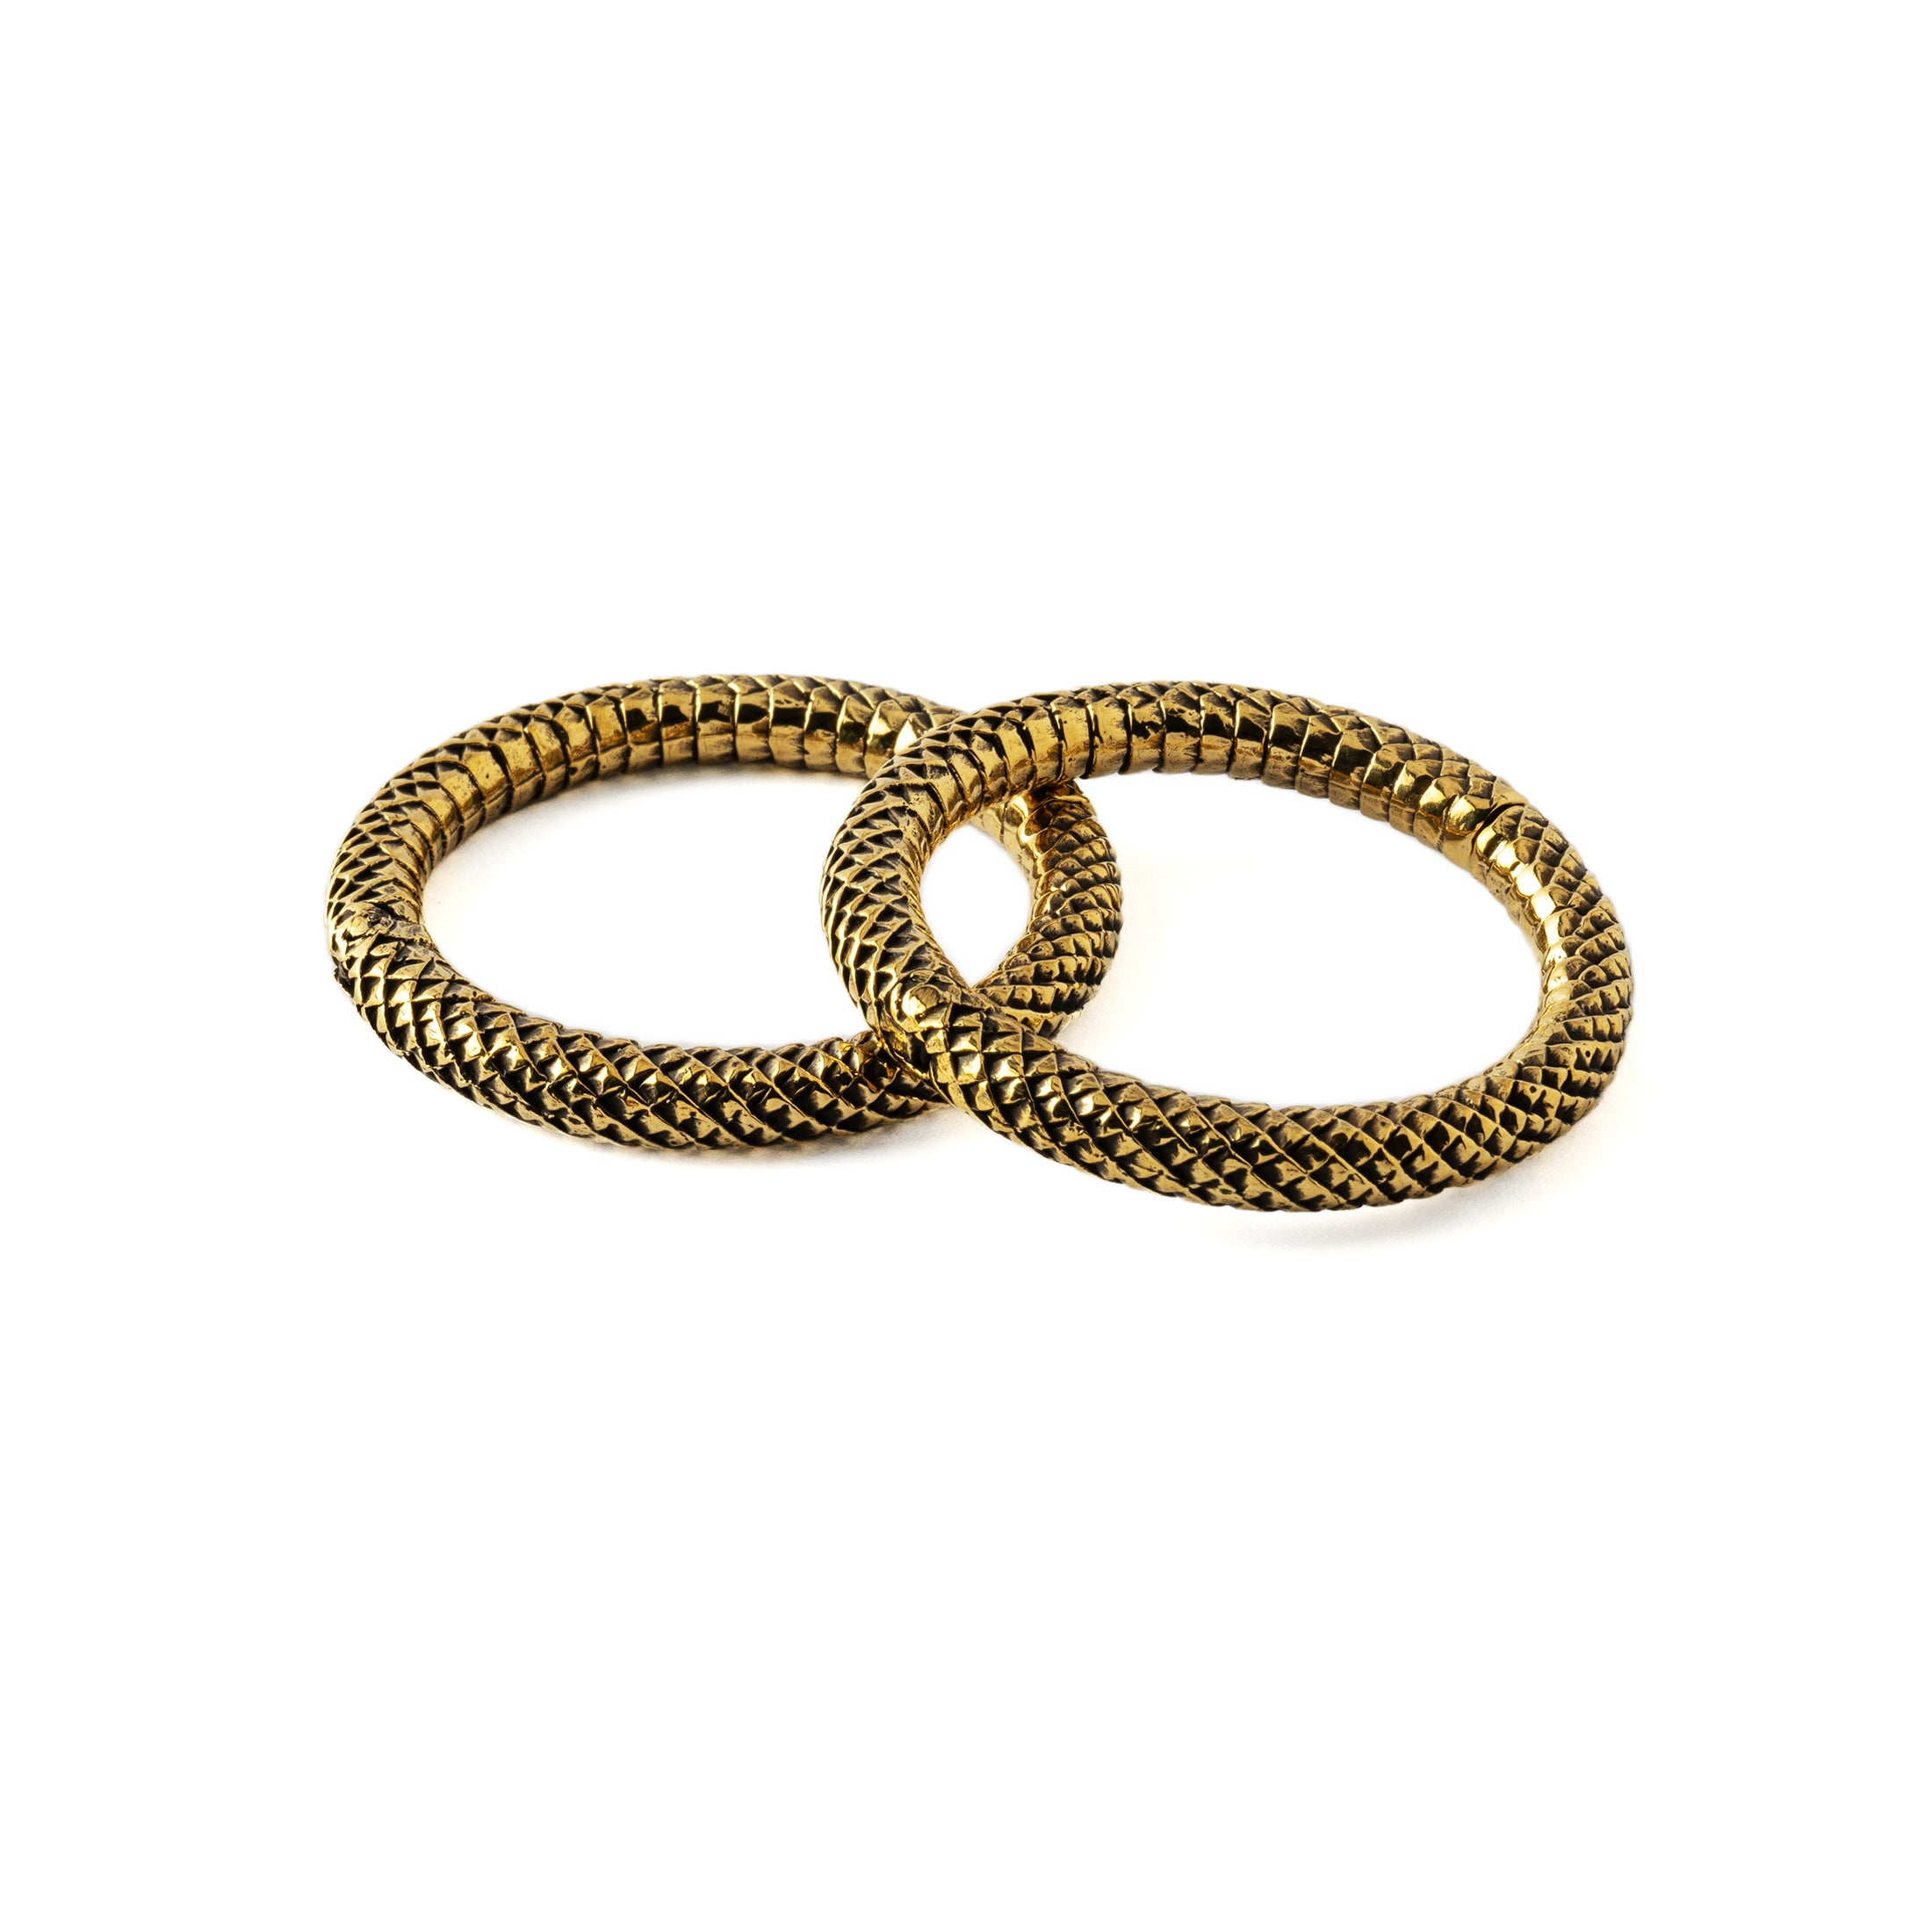 pair of 5mm (4g) Rebirth large size clicker rings